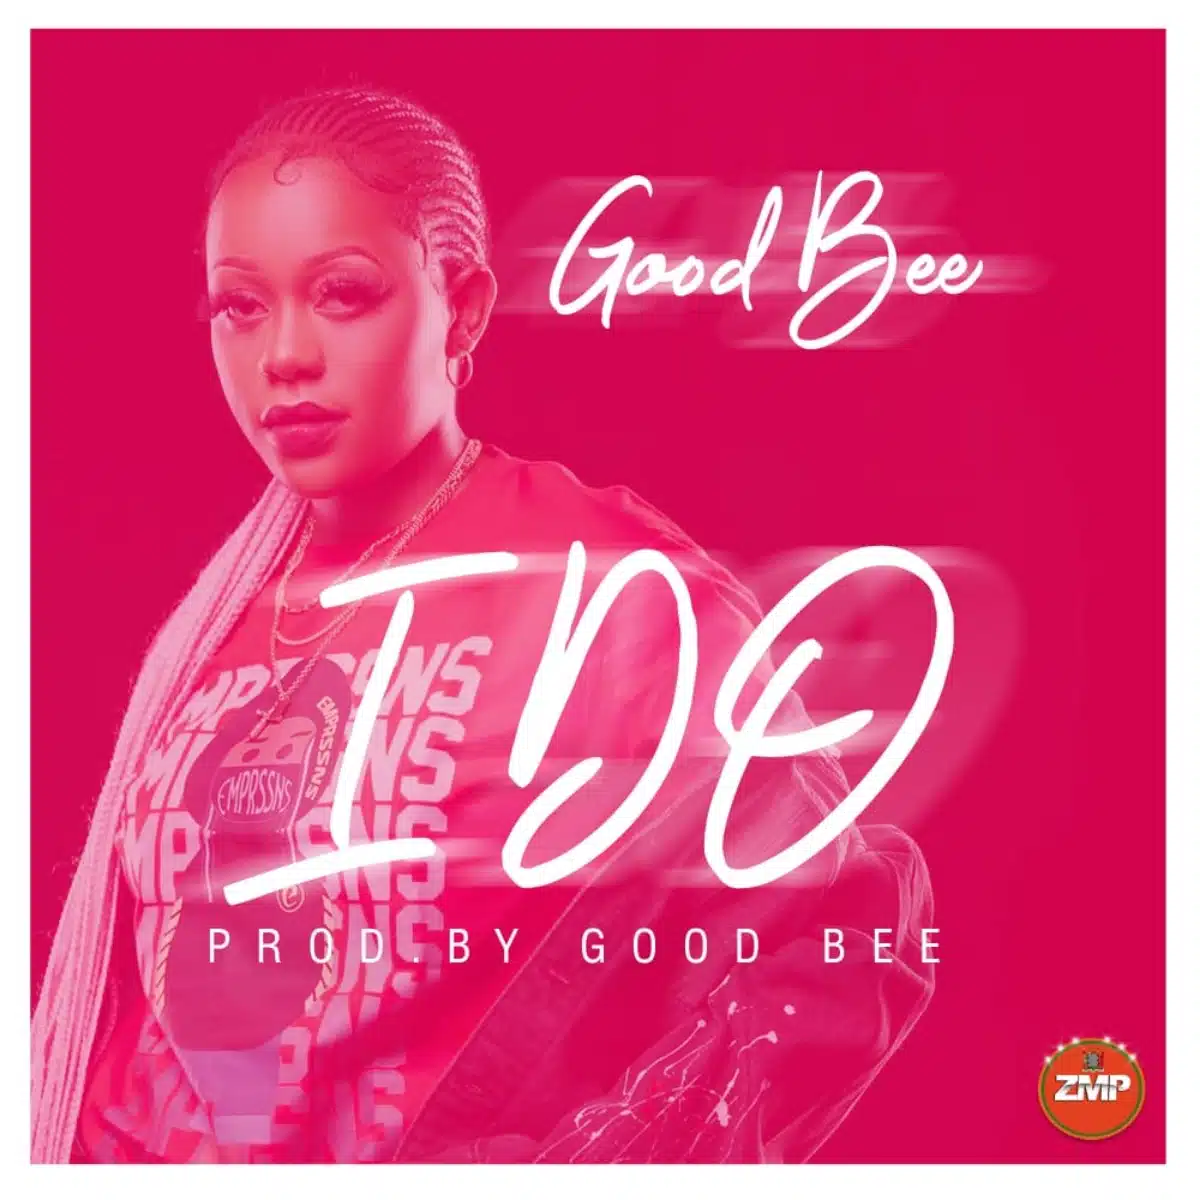 DOWNLOAD: Good Bee – “I Do” Mp3